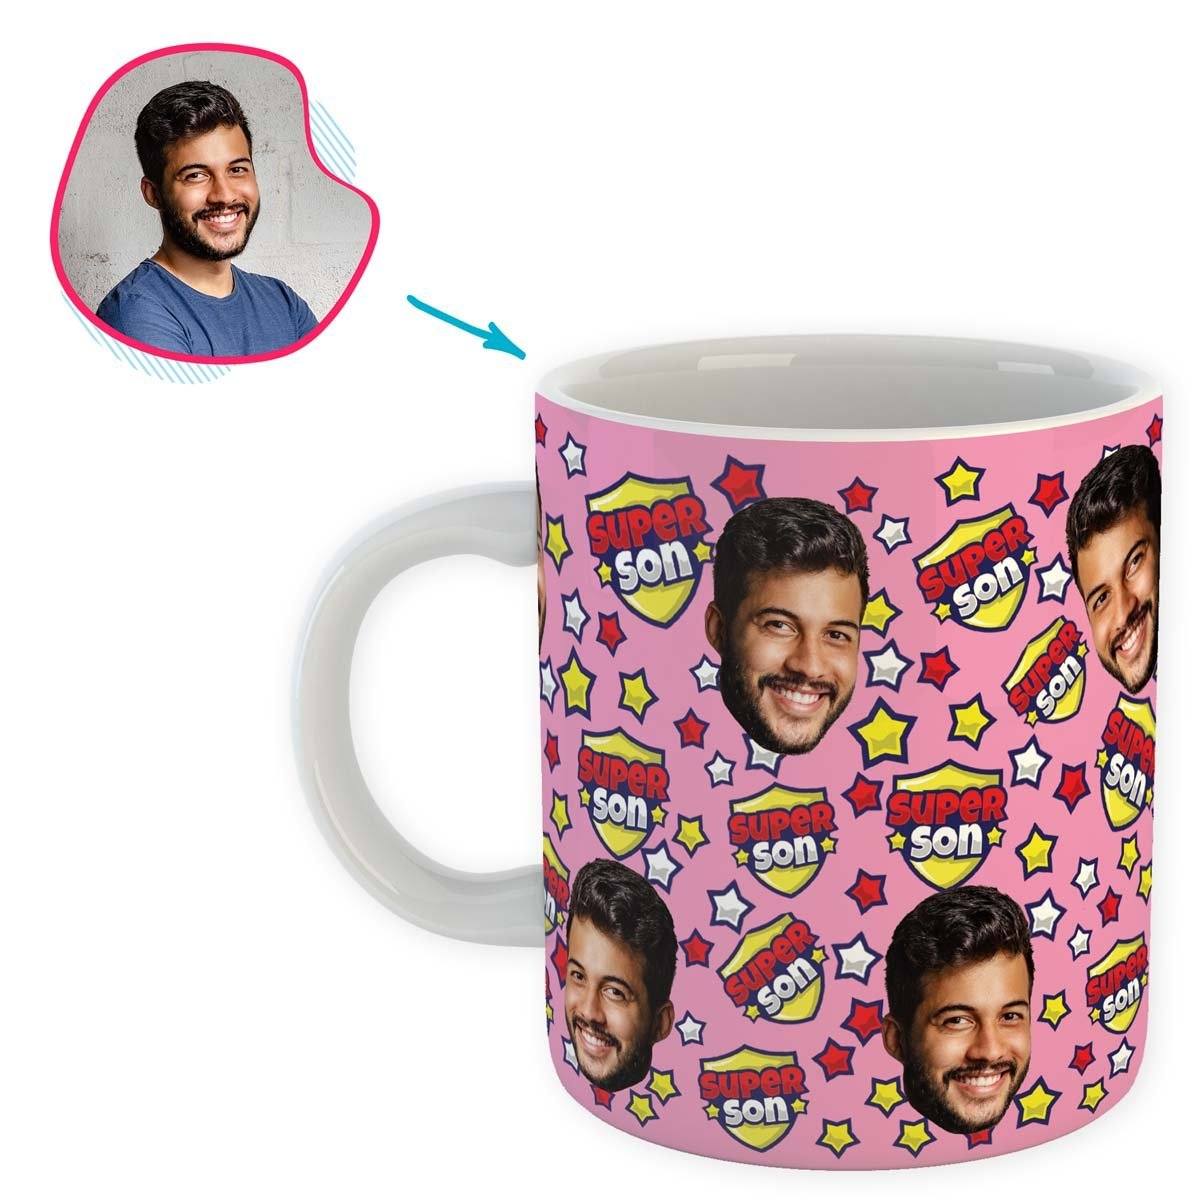 pink Super Son mug personalized with photo of face printed on it